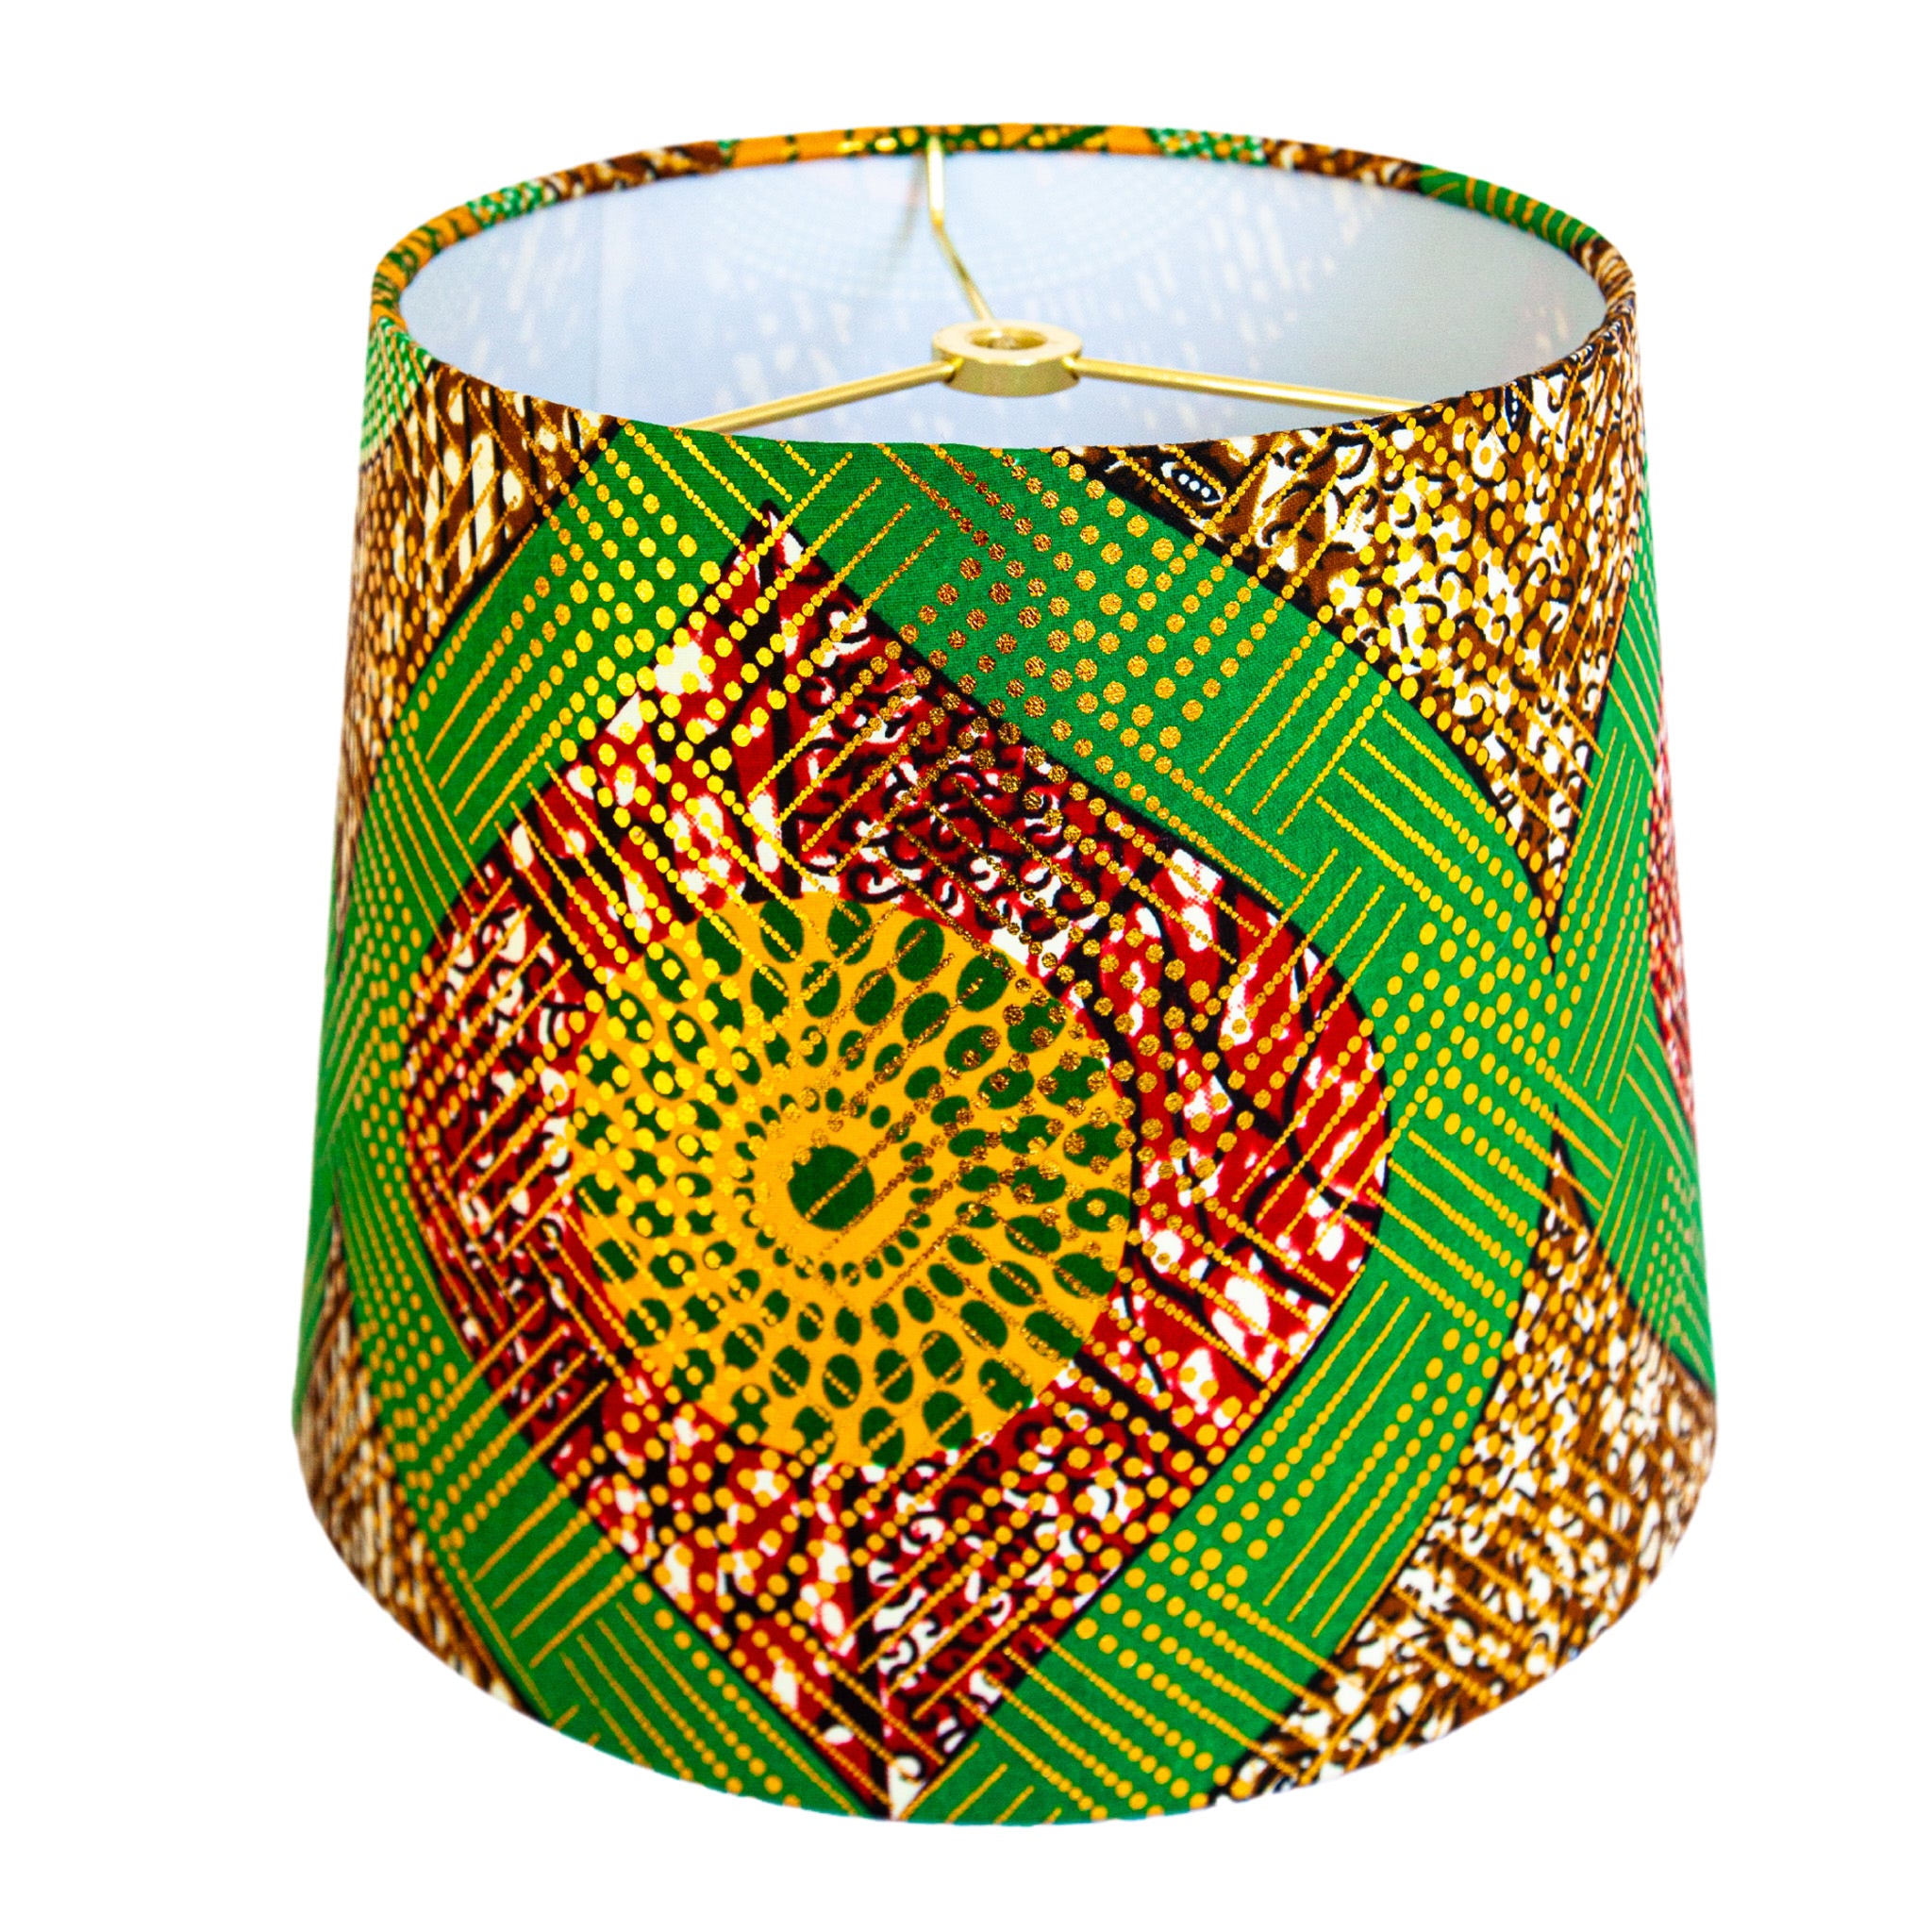 Lauren / Red Green and Gold African Wax Fabric in Geometric Print Lamp Shade